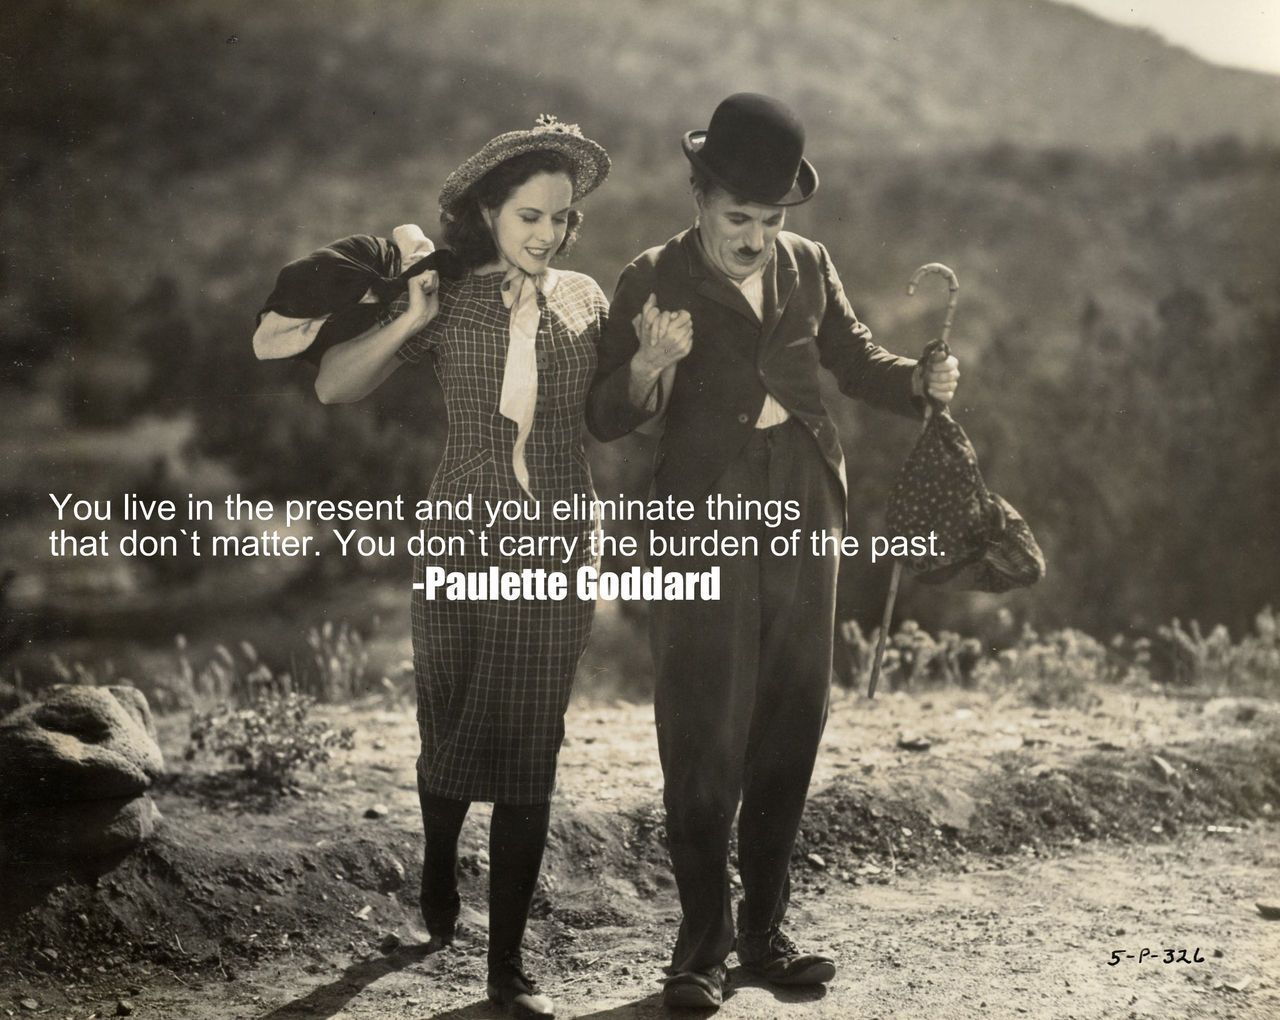 Famous Movie Quotes About Love Quotesgram